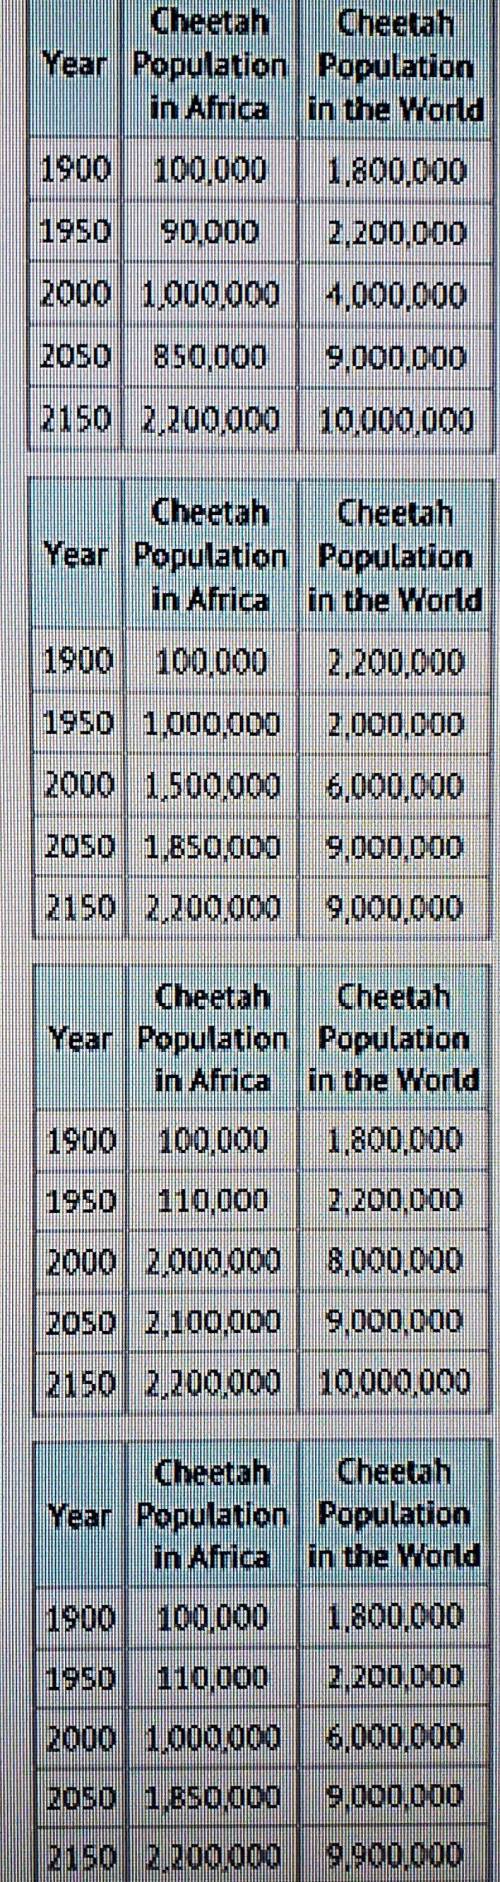 PLEASE HELP ASAP PLEASE

This bar graph shows the cheetah population of Africa and the world in th